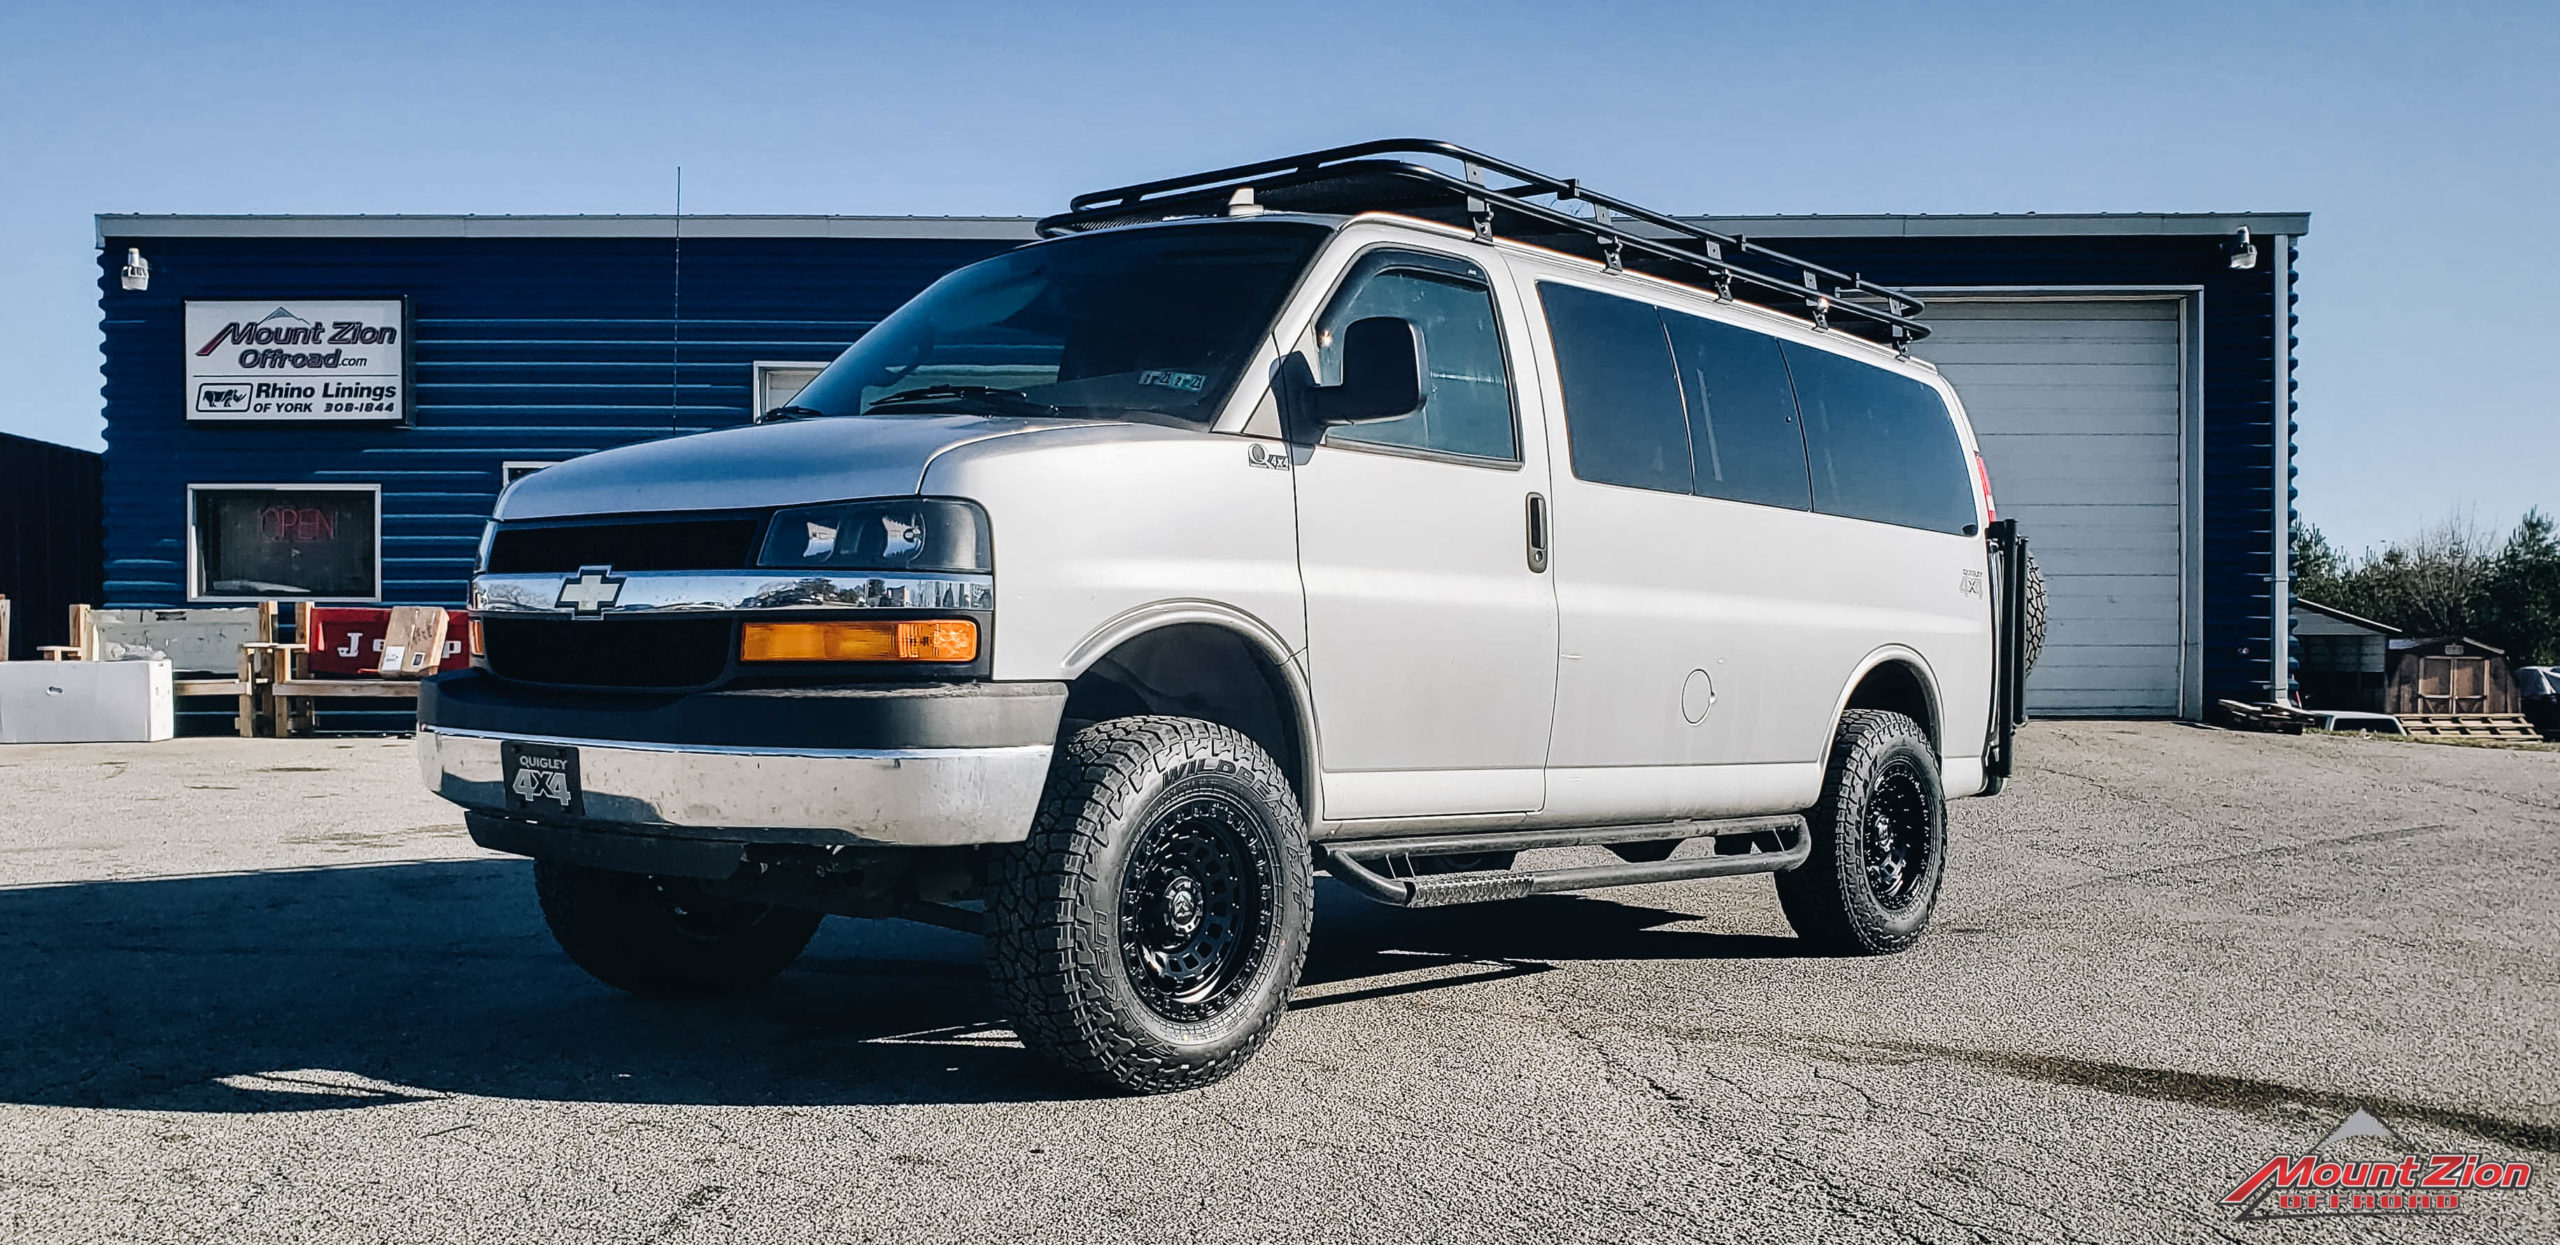 2016 Chevy Express 2500 - Mount Zion Offroad Builds